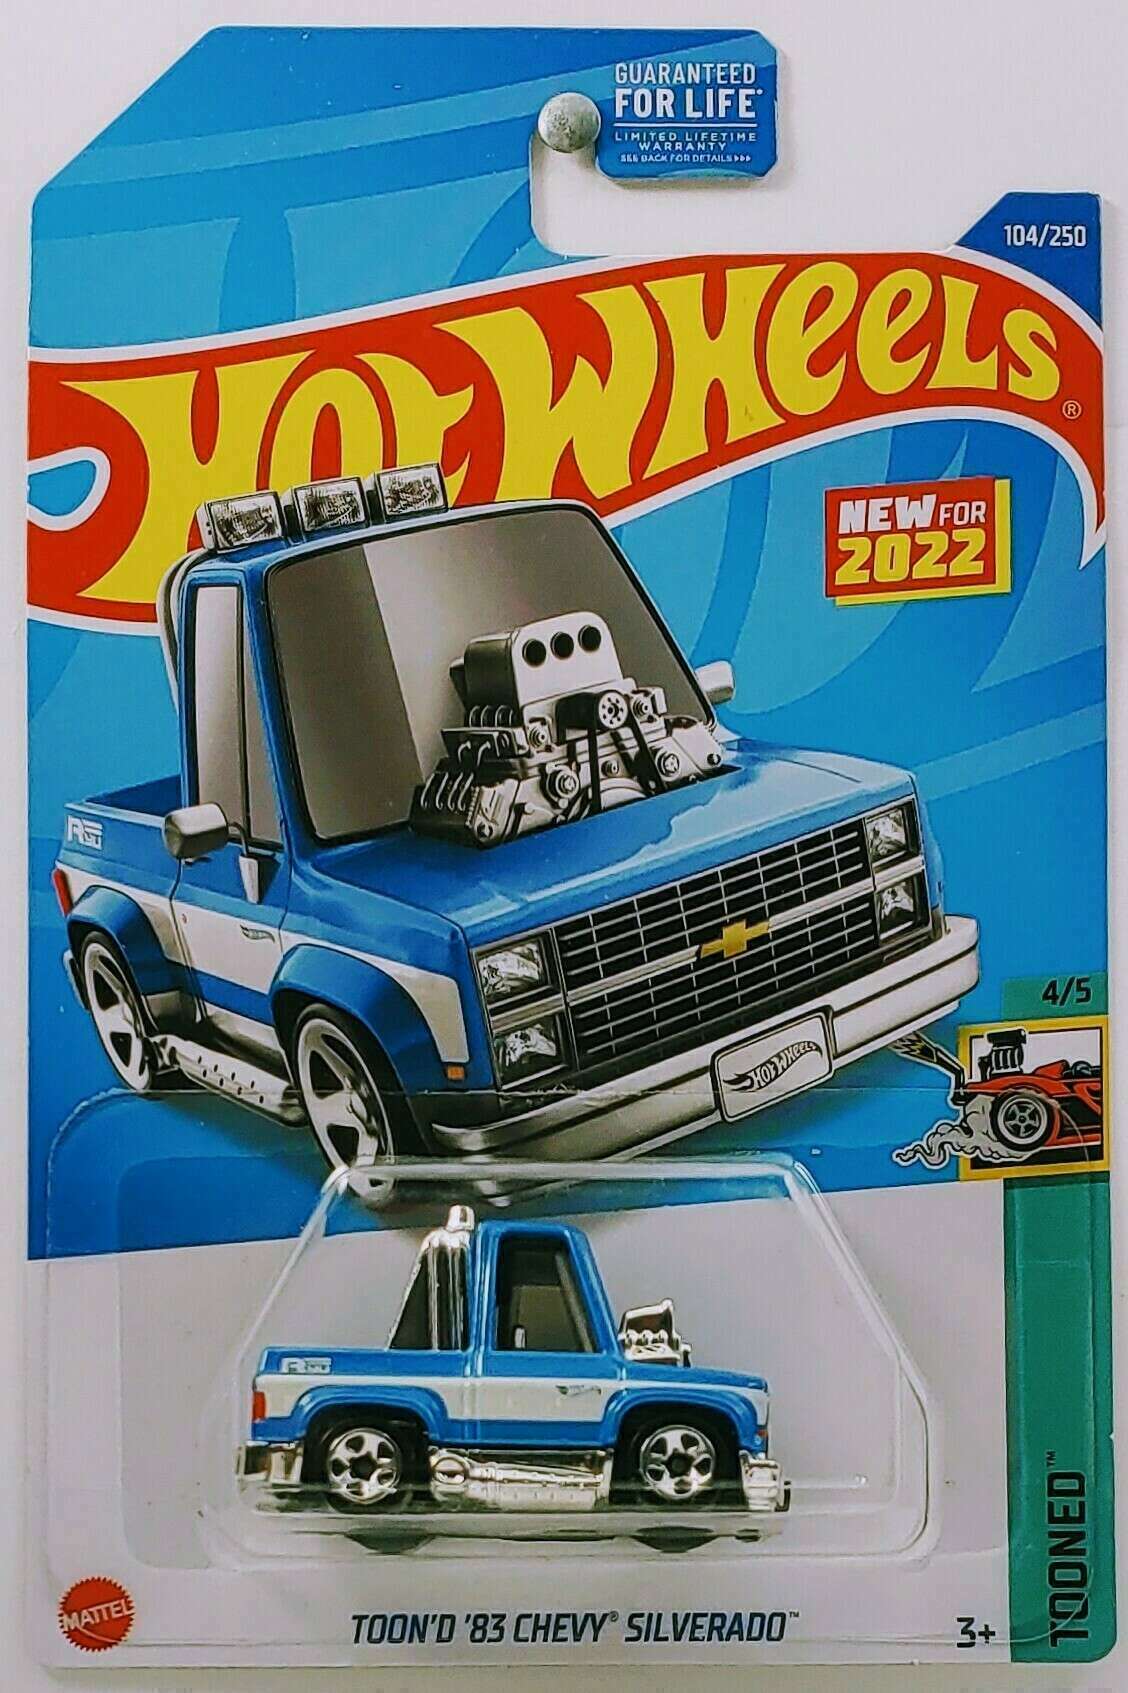 Hot Wheels 2022 - Collector # 104/250 - Tooned 4/5 - New Models - Toon'd '83 Chevy Silverado - Blue - USA